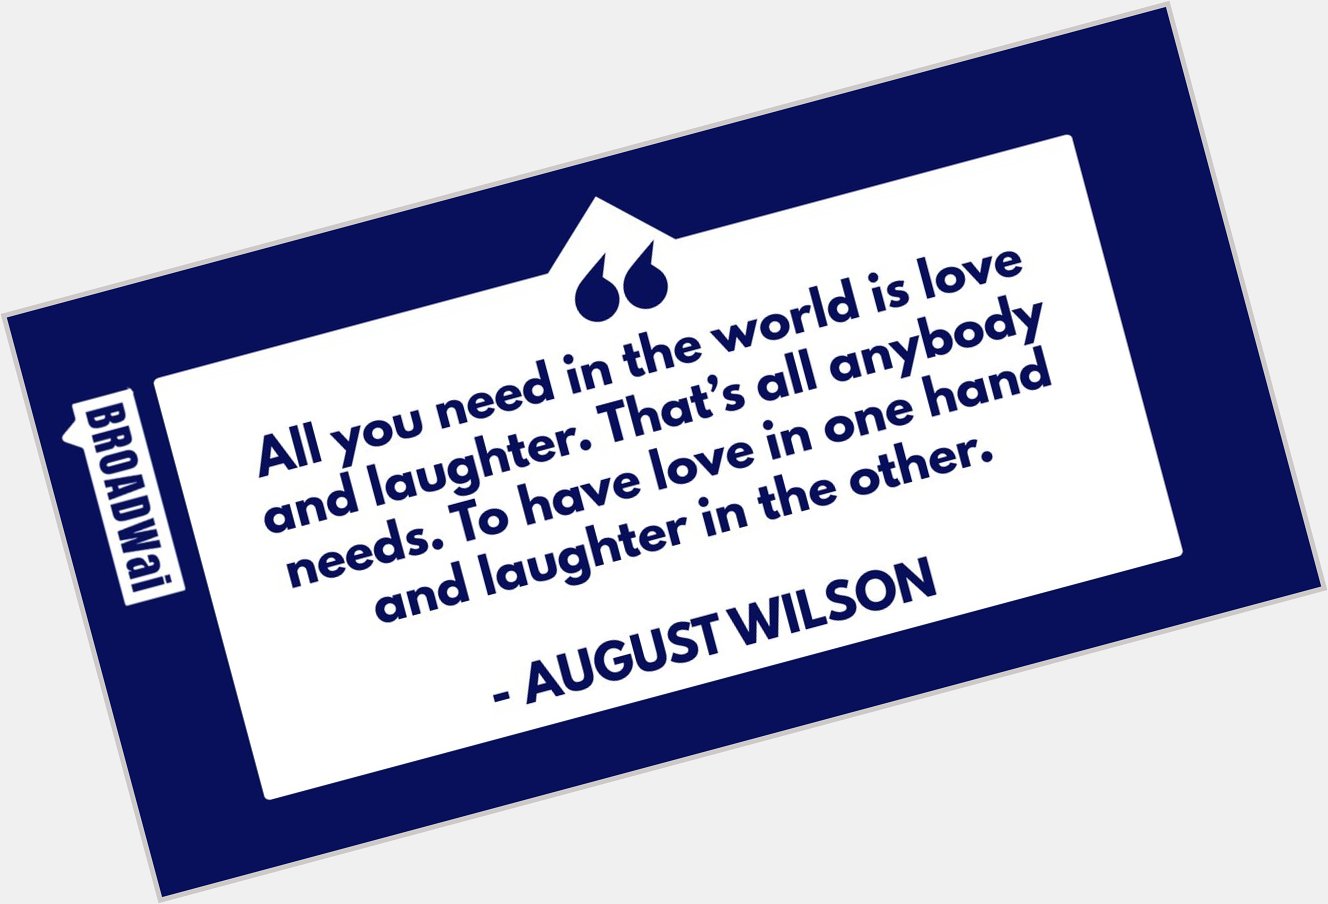 Happy birthday, August Wilson. Today we celebrate your legacy.    